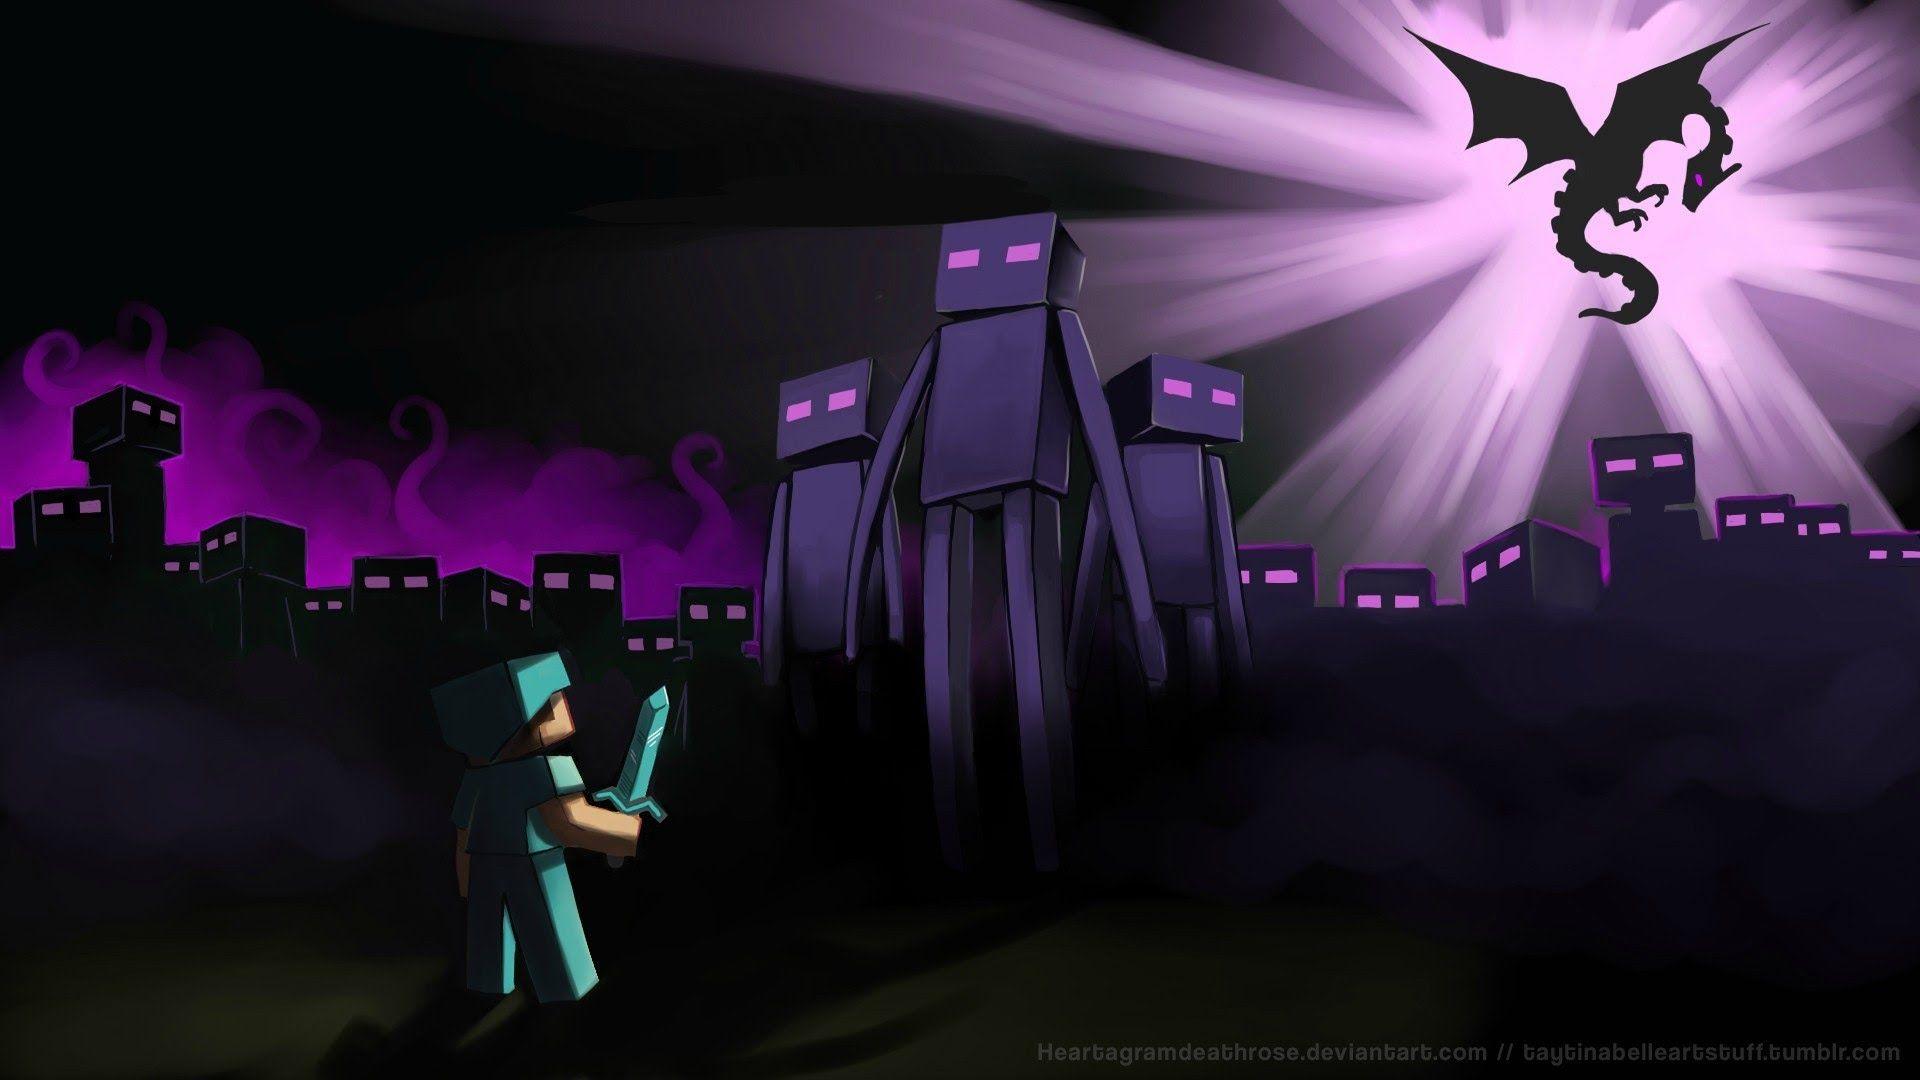 Minecraft Ender Dragon Wallpapers Top Free Minecraft Ender Dragon Backgrounds Wallpaperaccess Choose any dragon minecraft skin to download or remix for free. minecraft ender dragon wallpapers top